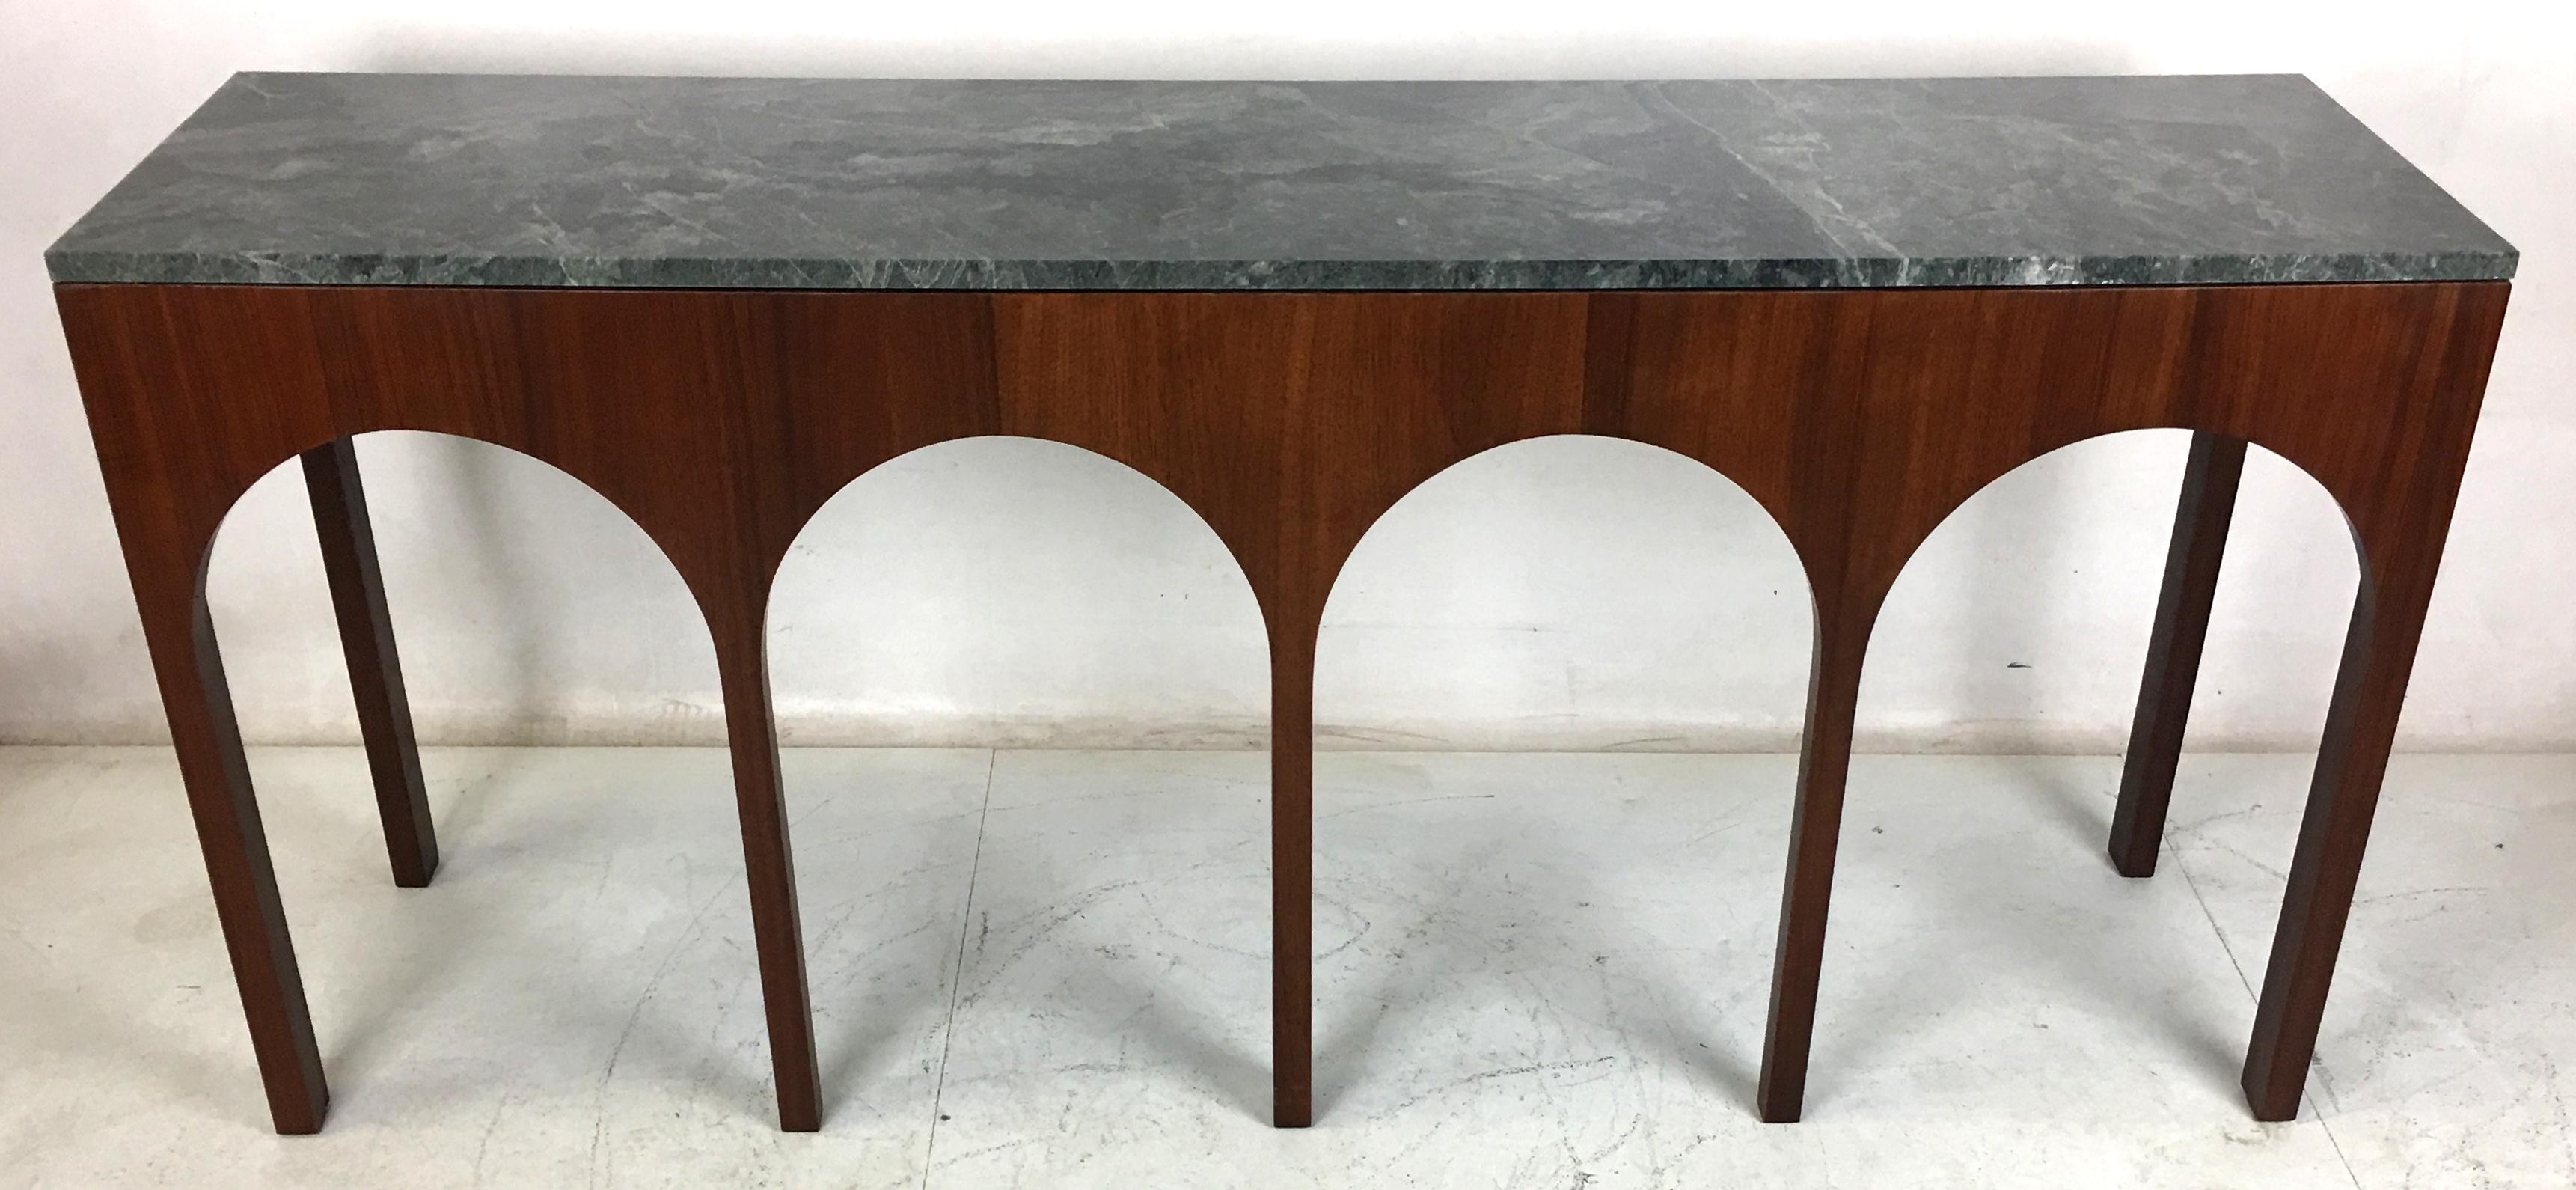 Rare and exquisite walnut console with deep green marble top by T.H. Robsjohn-Gibbings for Widdicomb. The table has been meticulously refinished in open grain Medium-dark Walnut lacquer. The top has been professionally polished and is in perfect